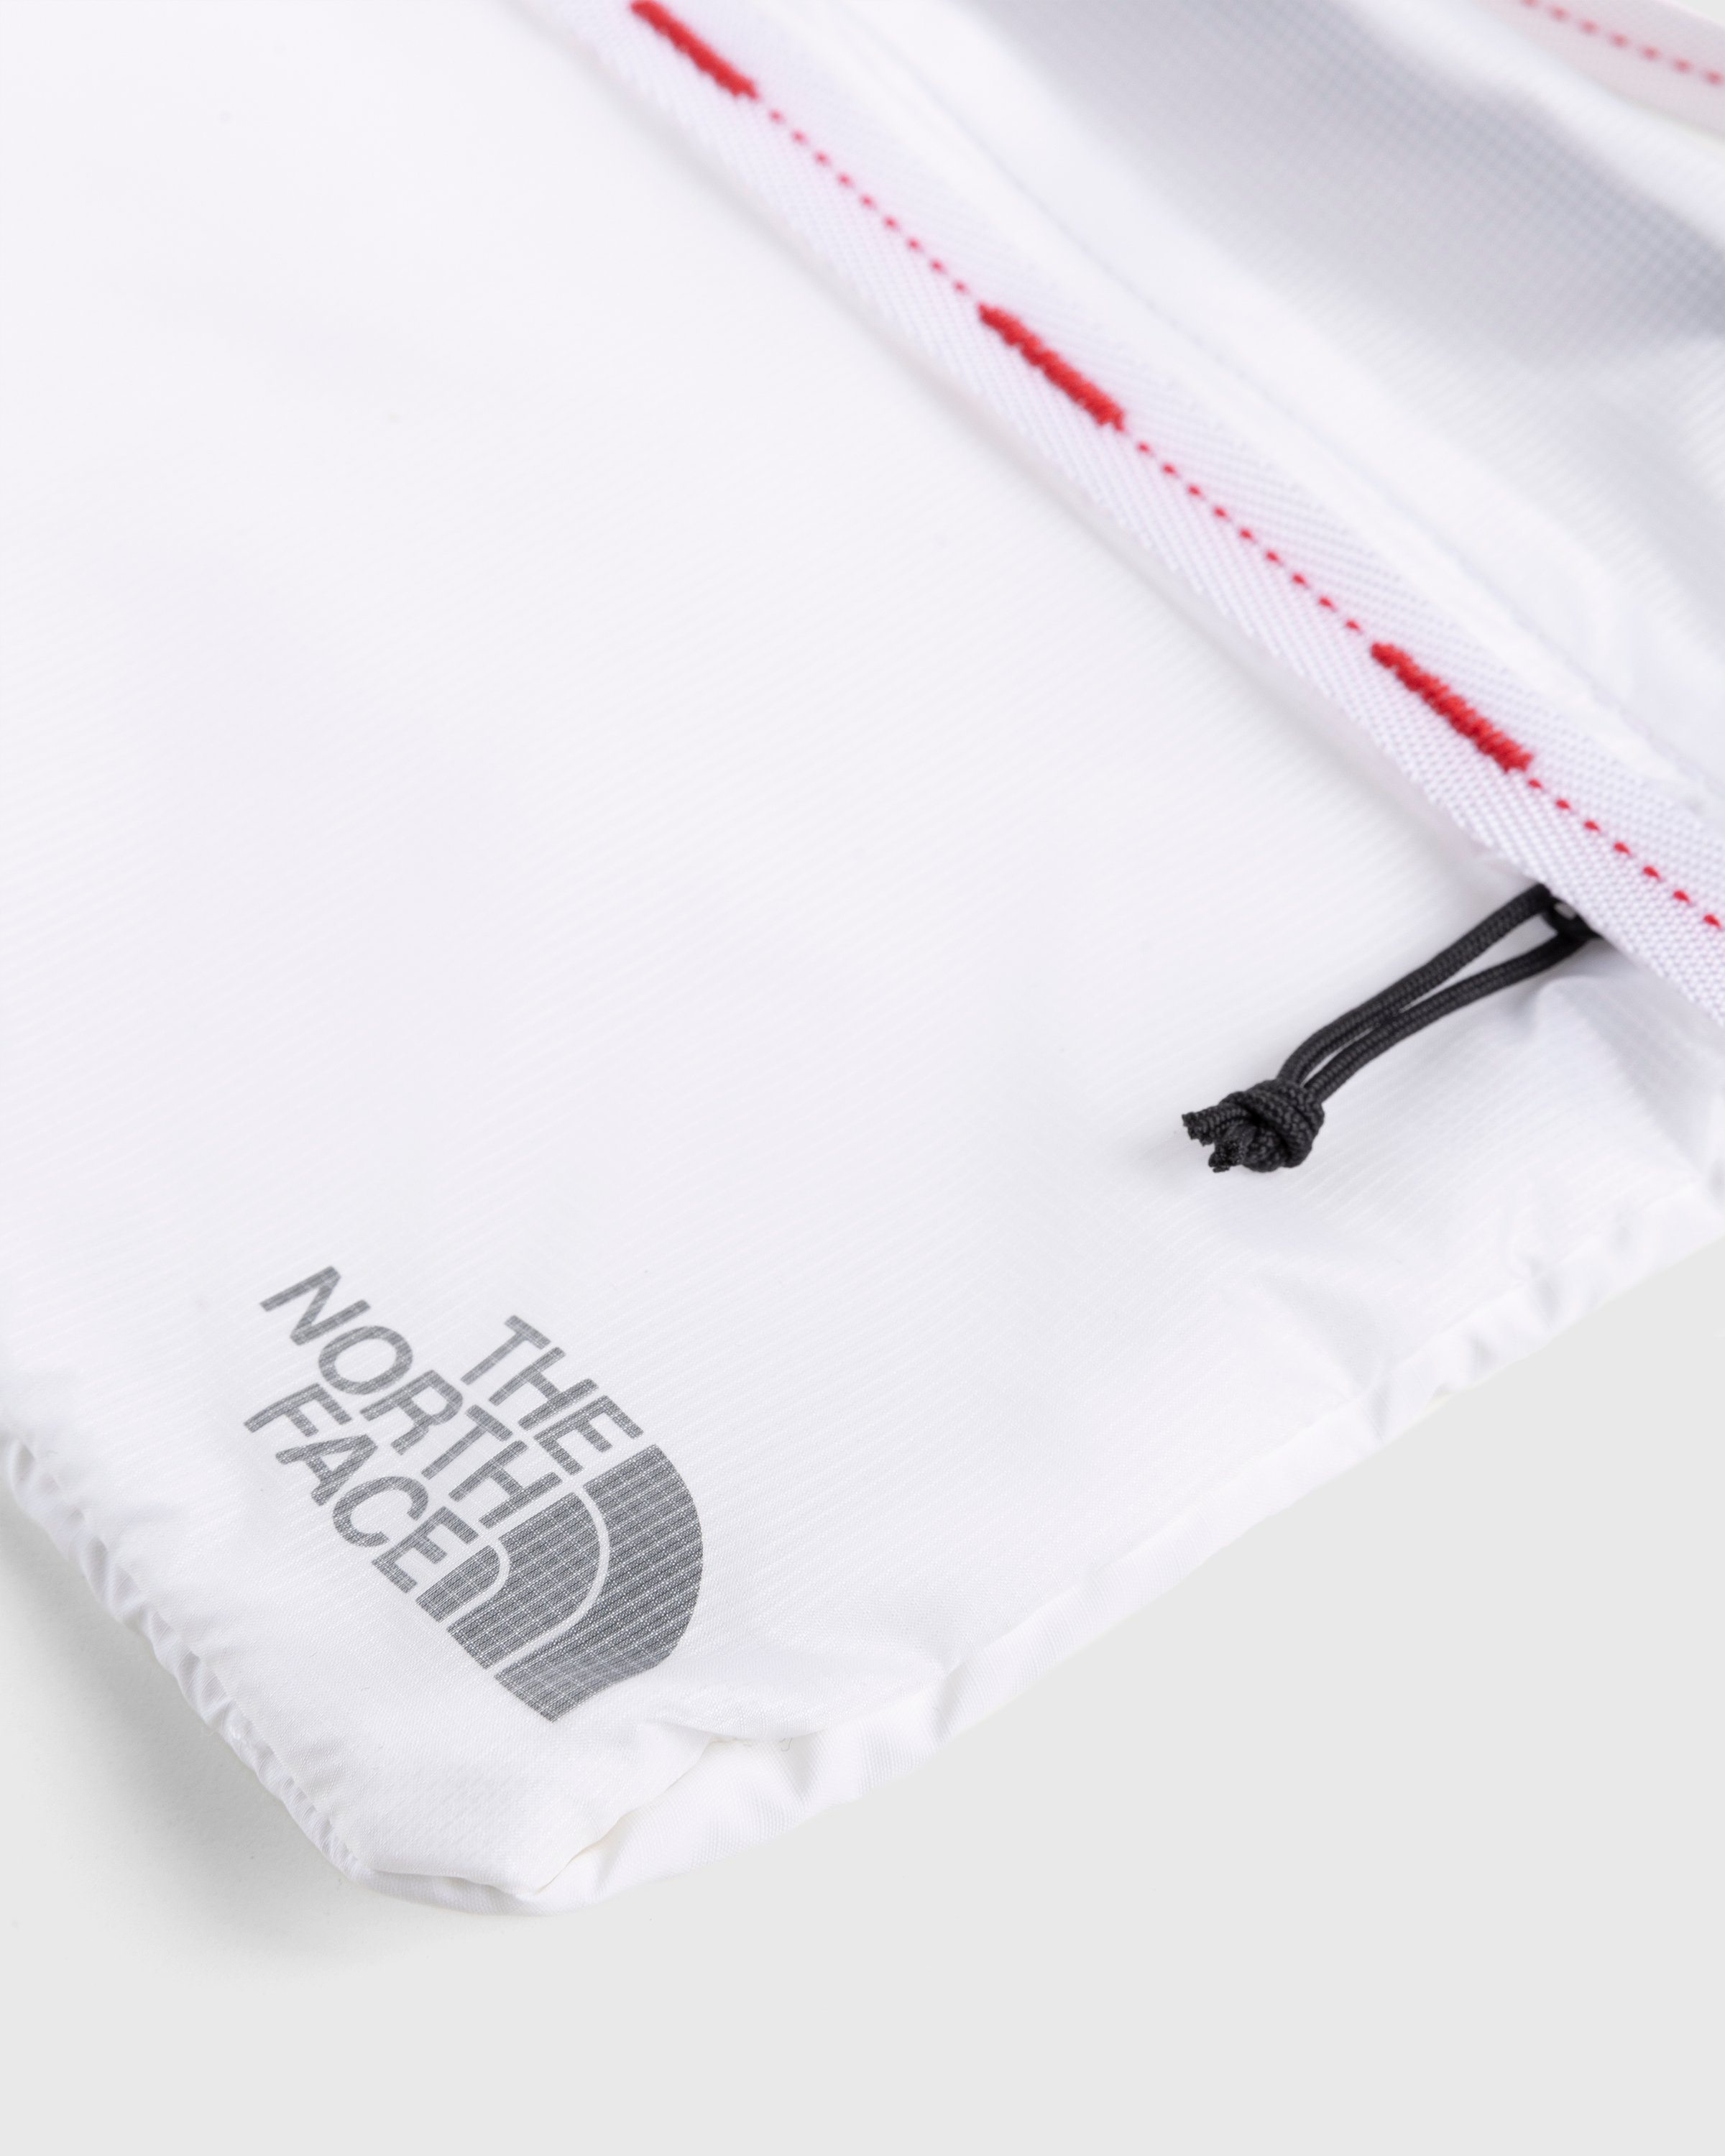 The North Face - Flyweight Shoulder Bag White/Asphalt Grey/Red - Accessories - White - Image 3